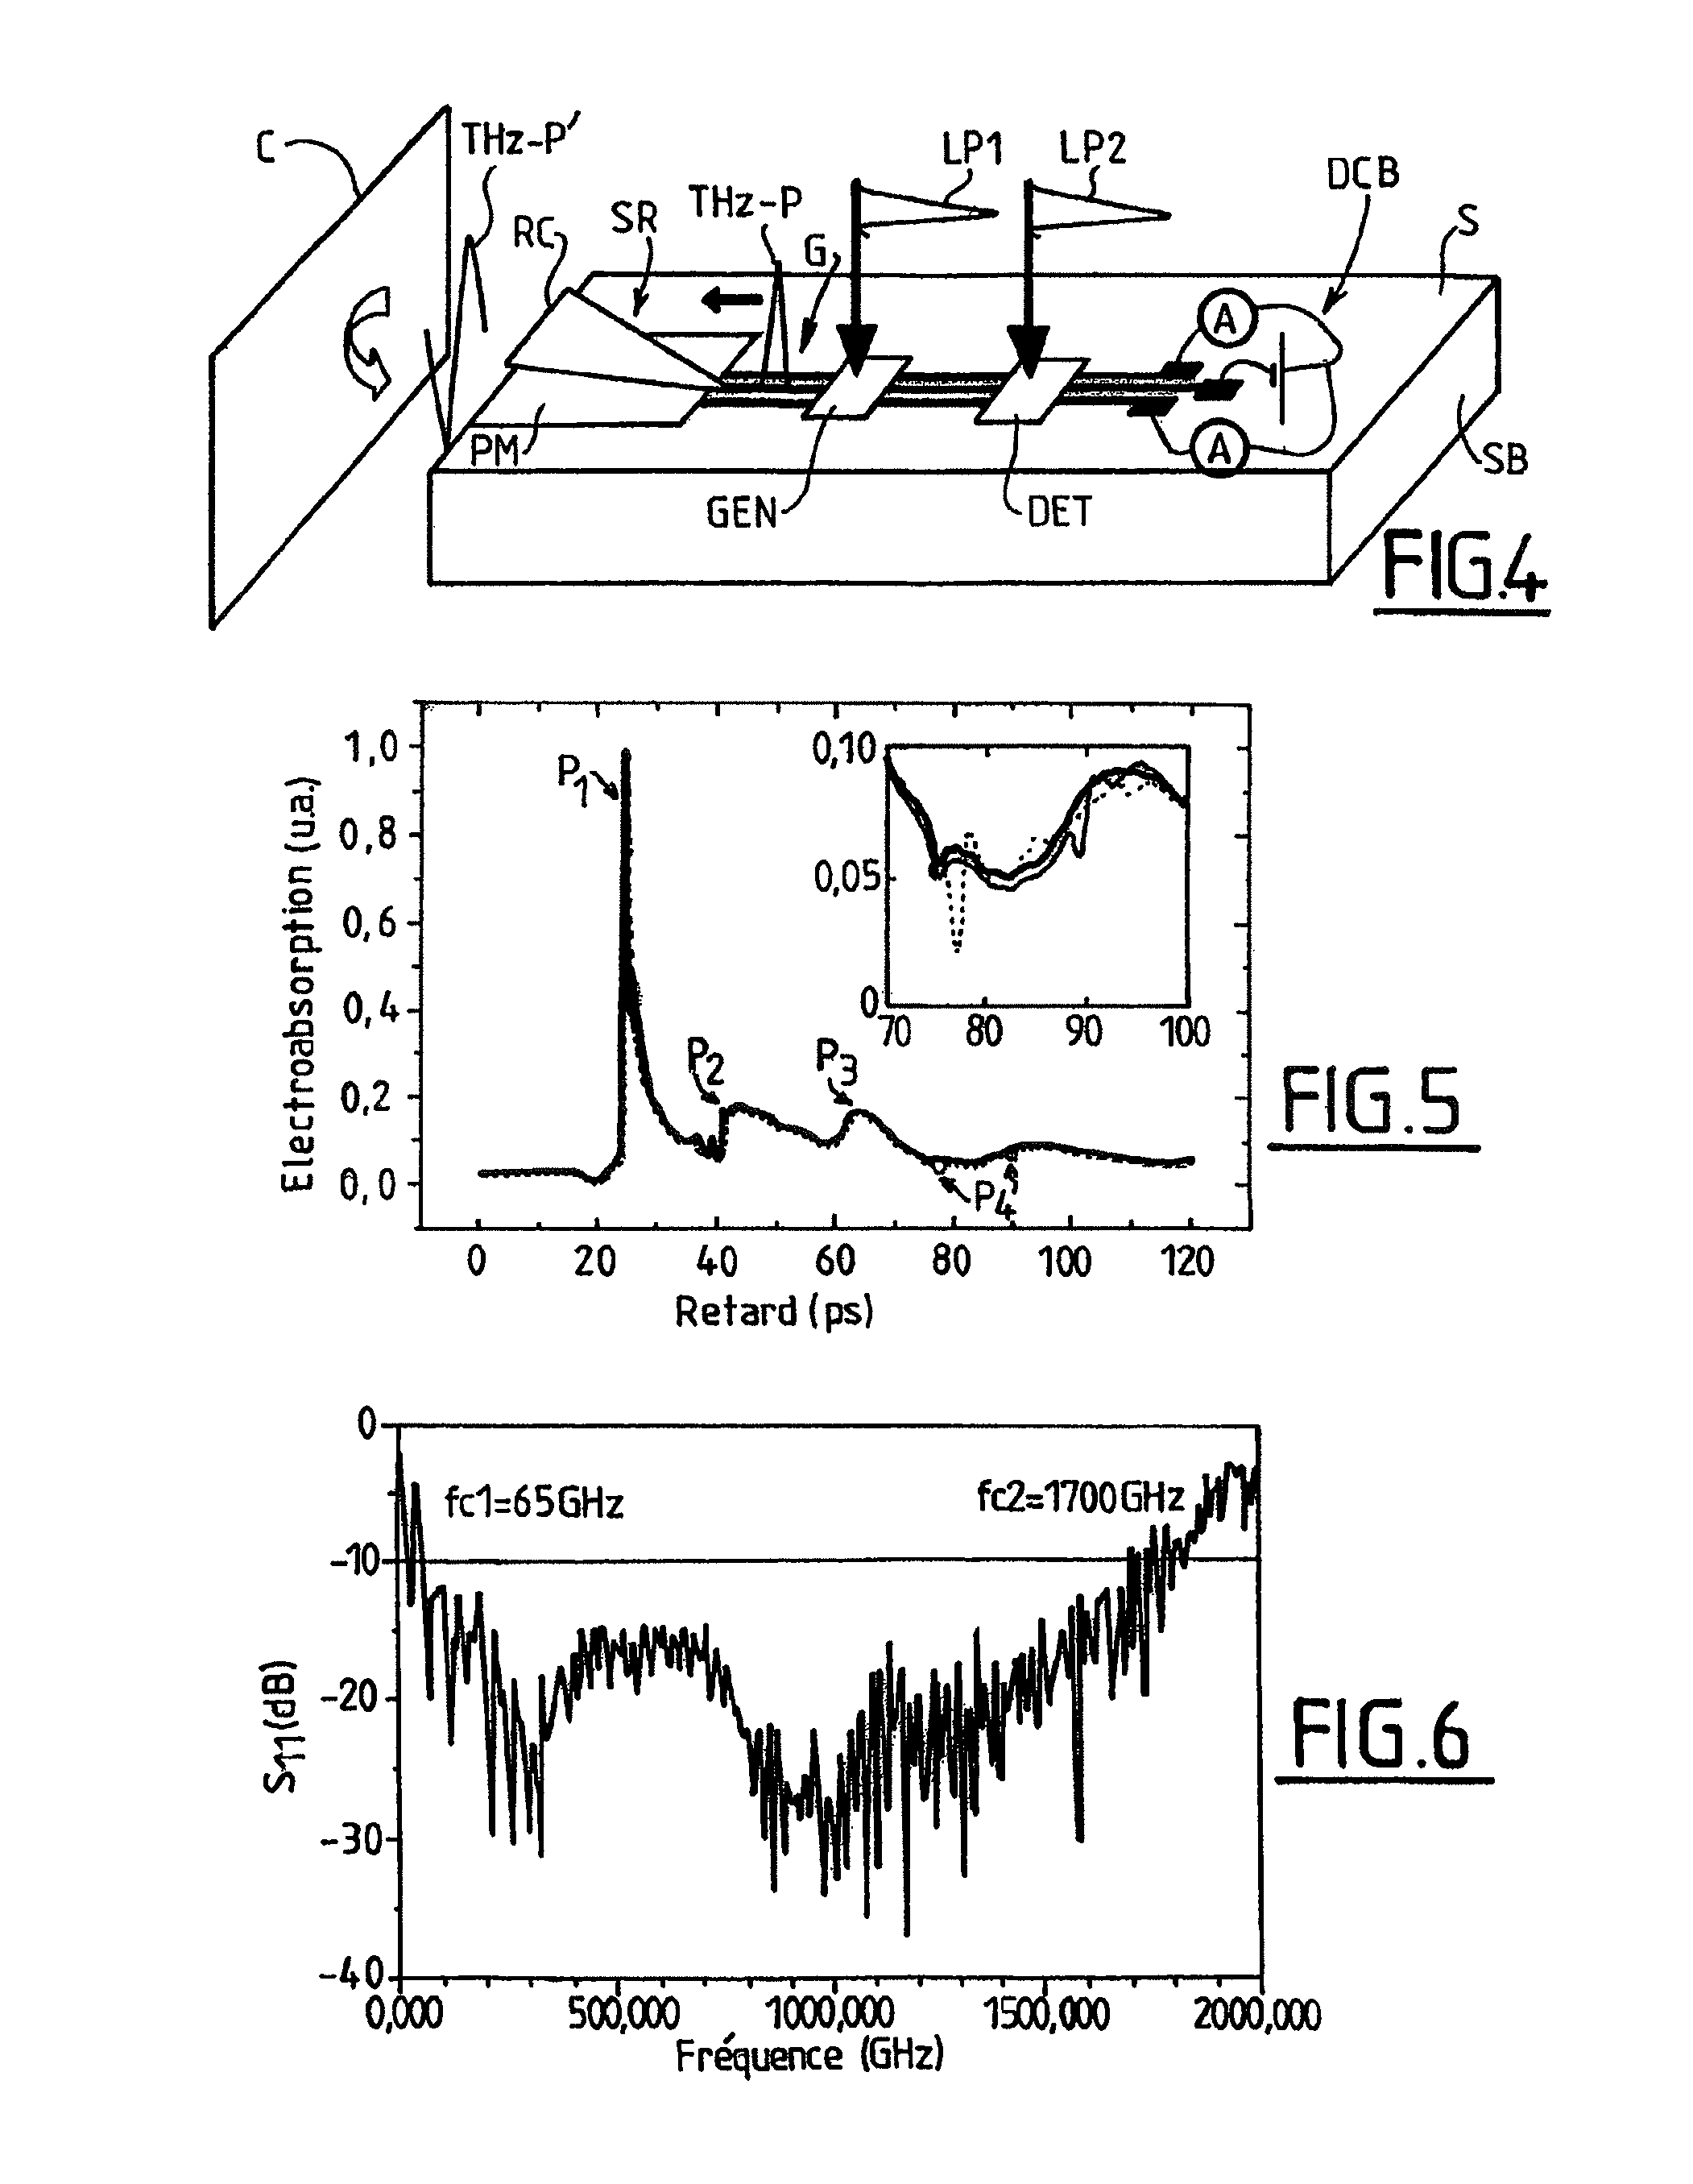 Integrated terahertz antenna and transmitter and/or receiver, and a method of fabricating them